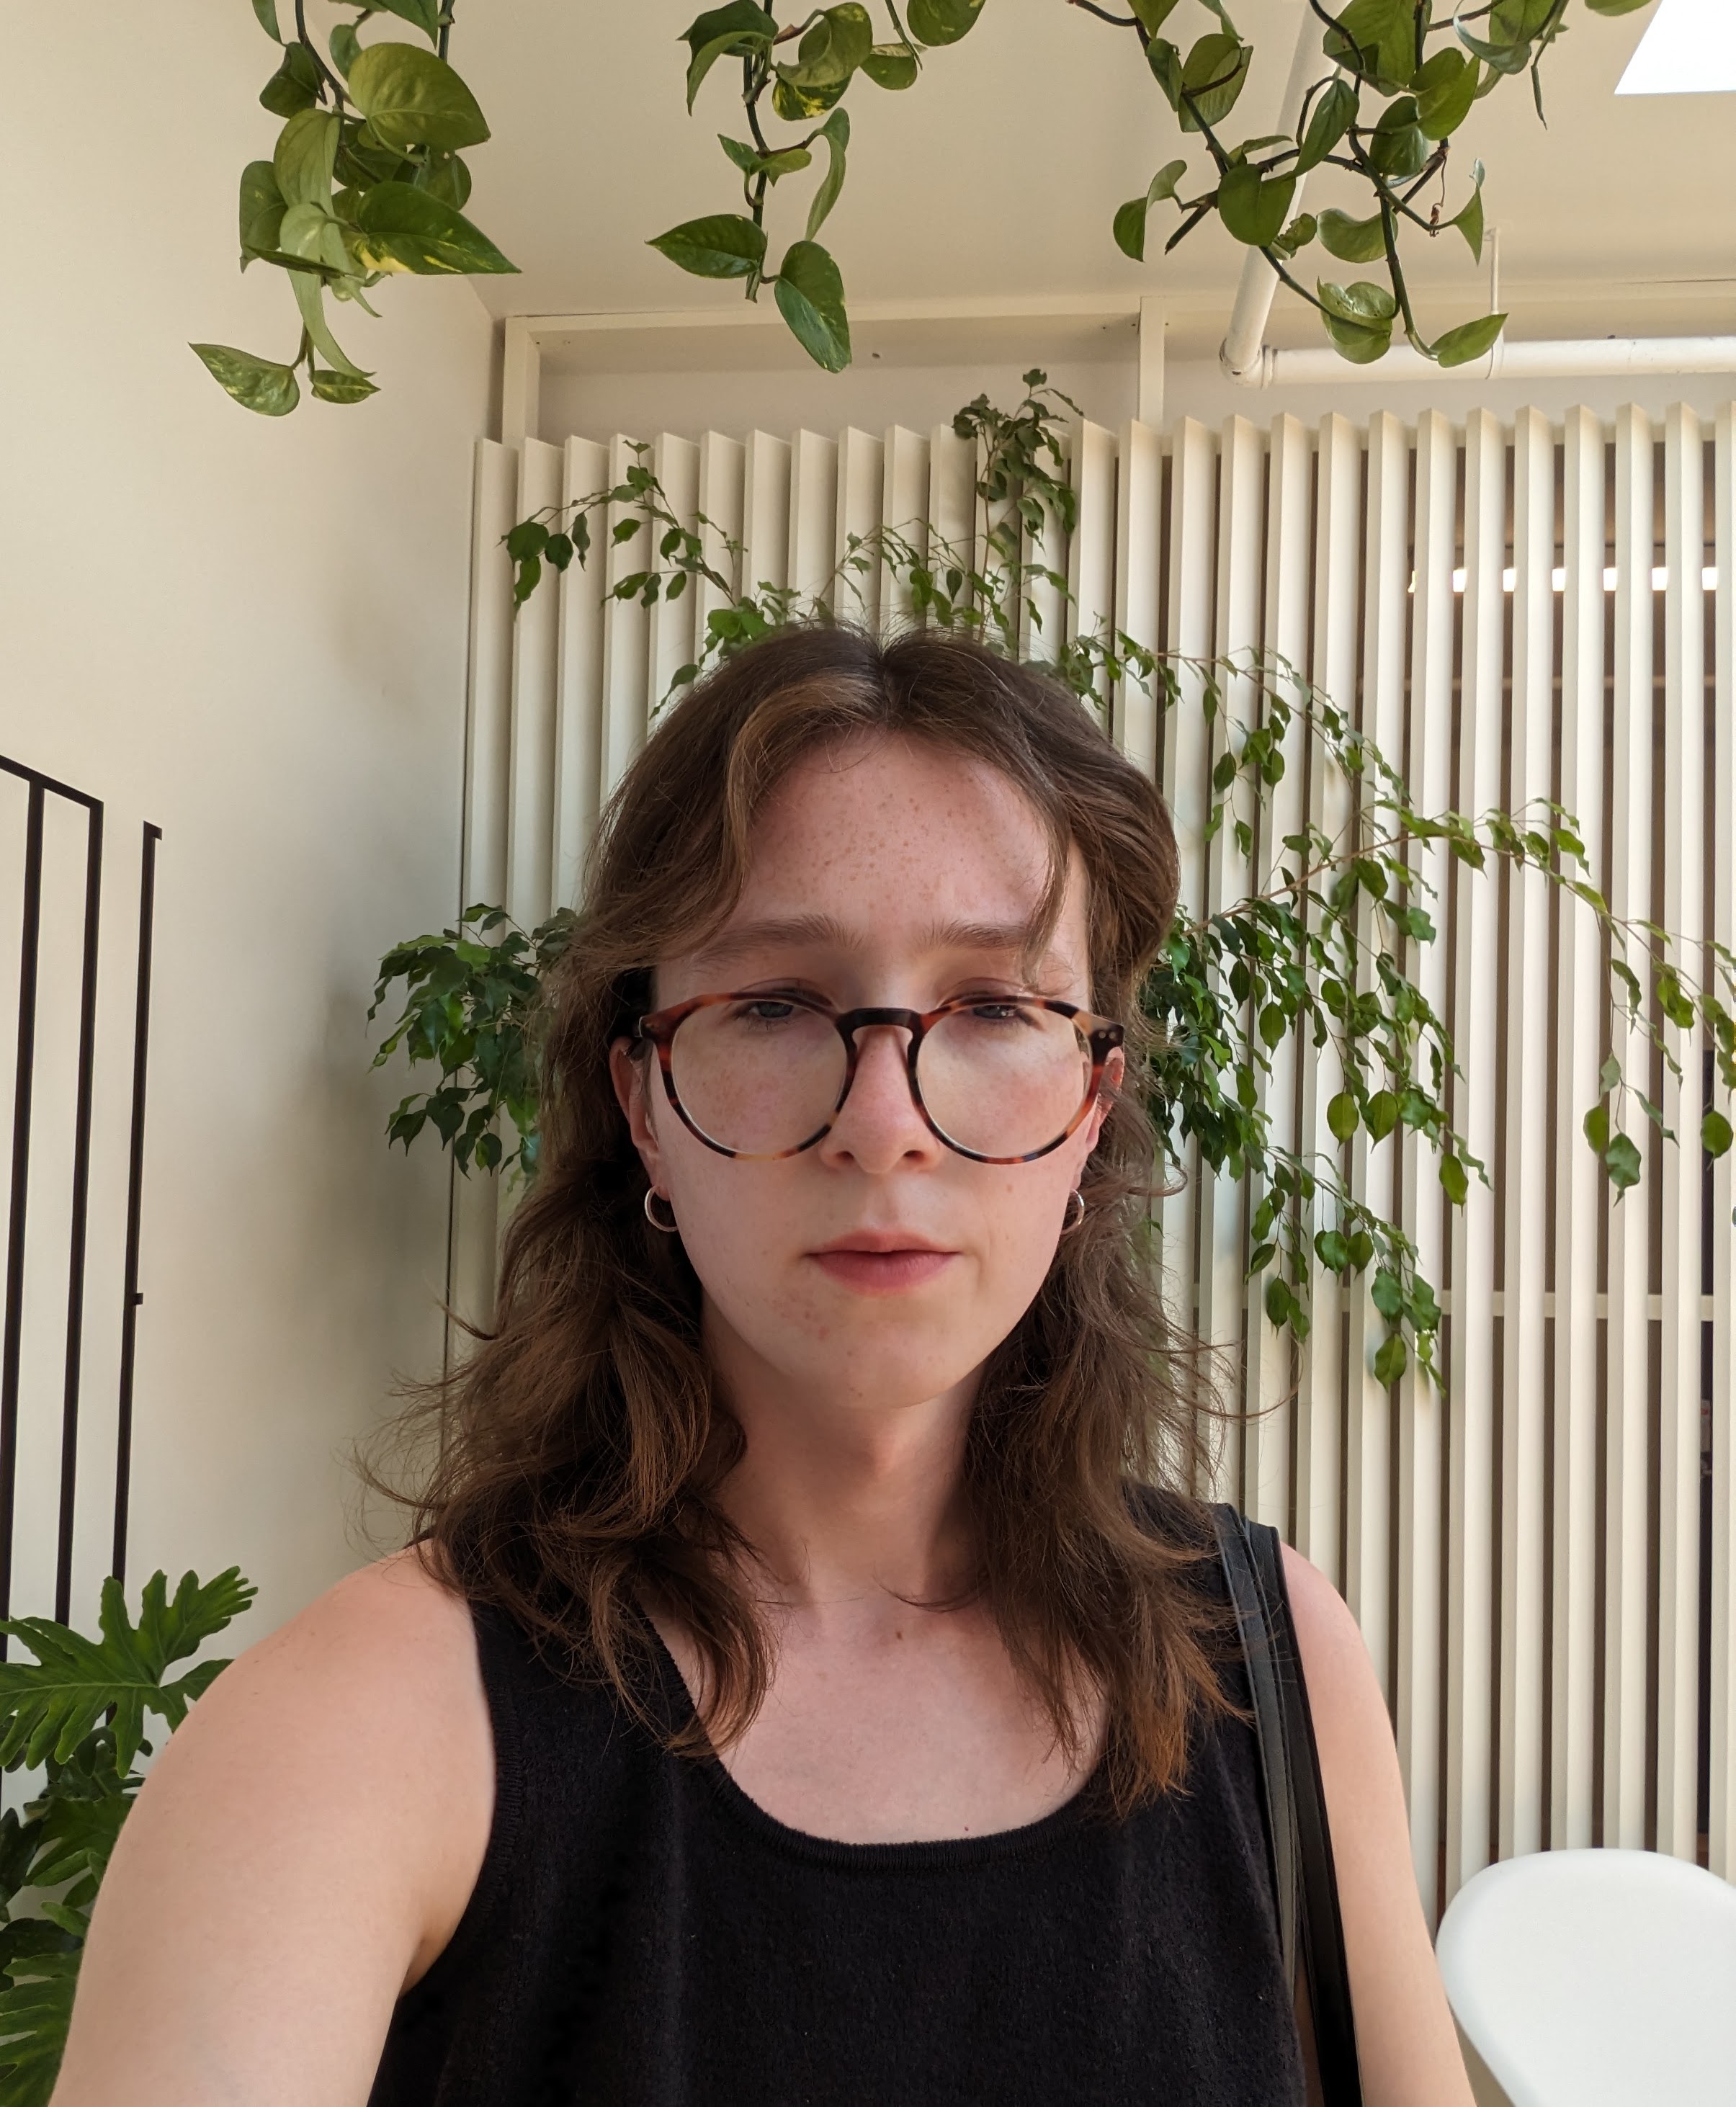 person with light skin tone, shoulder-length curly hair, and glasses in a room with plants